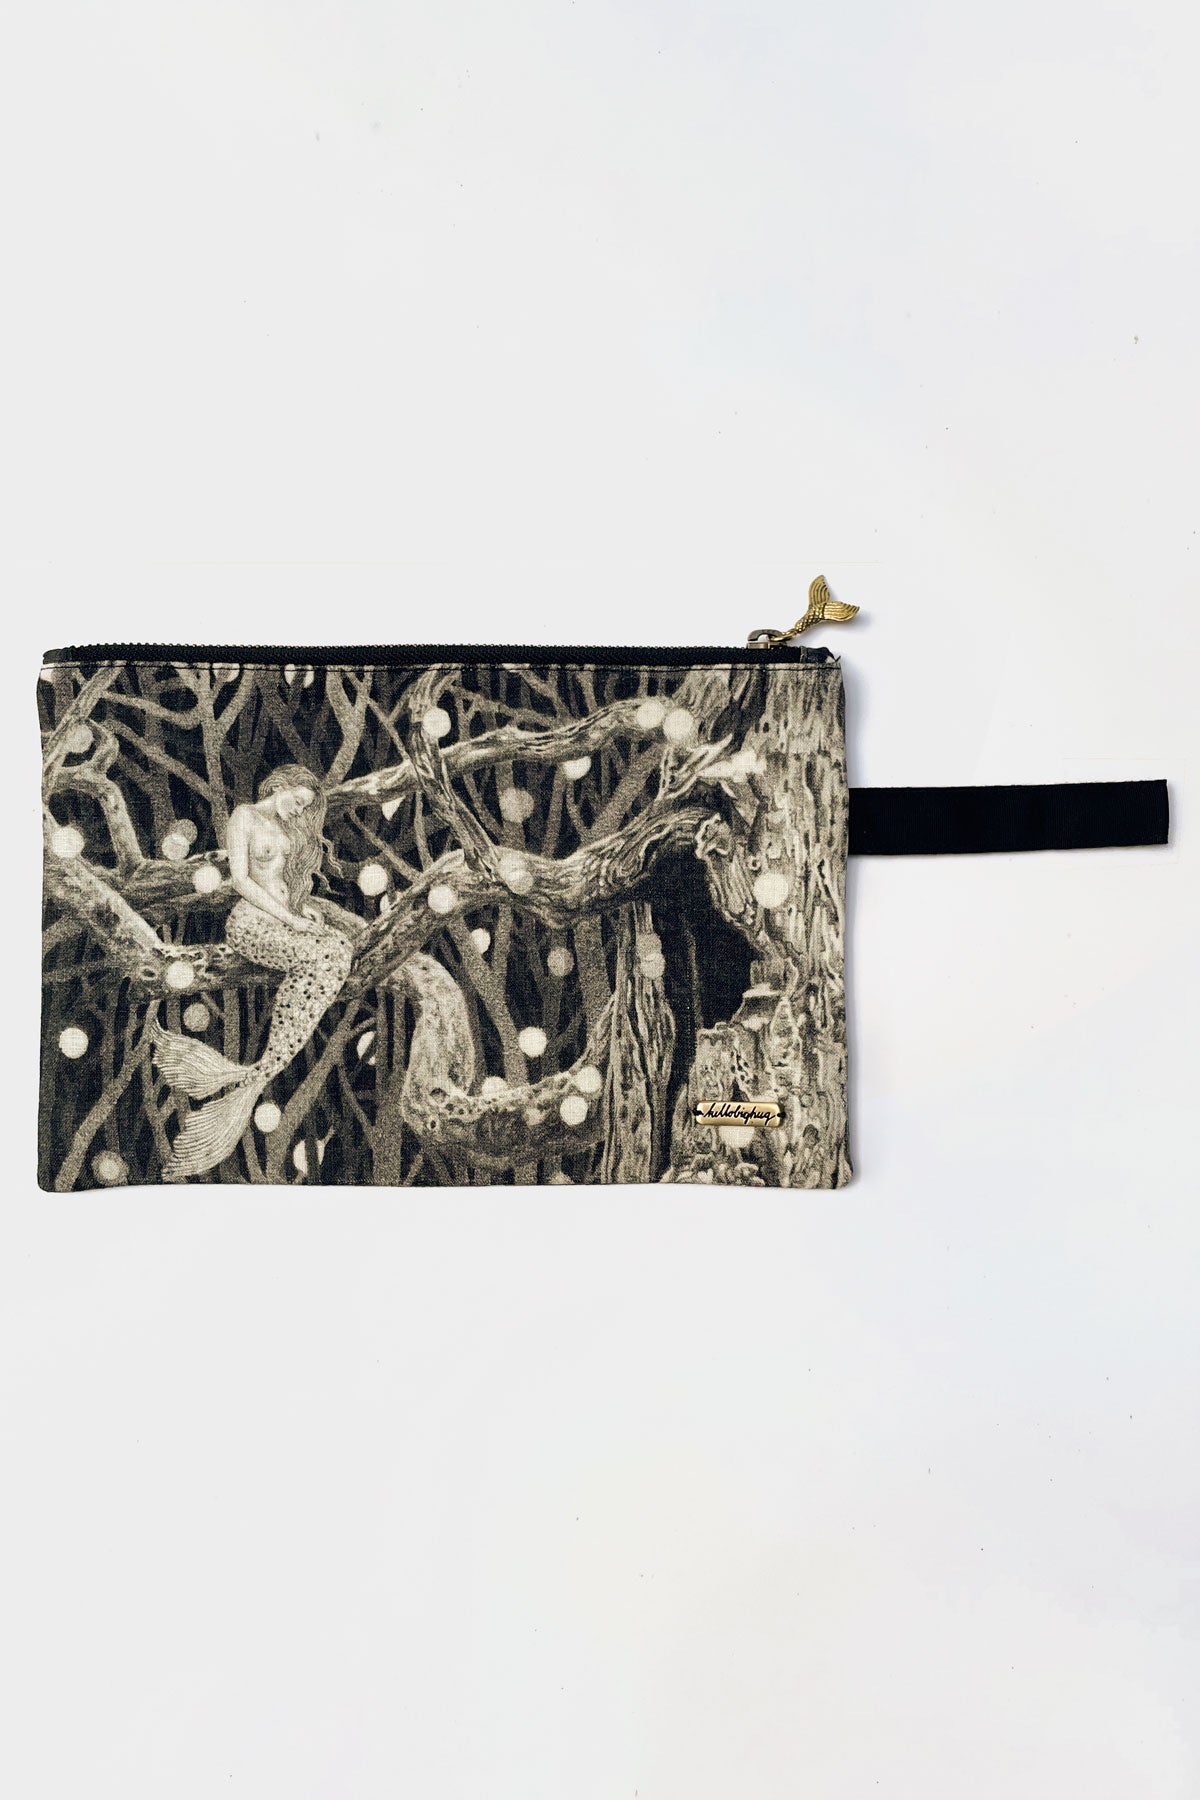 The multifunctional ‘Mermaid Pouch’ is the perfect companion for storing all your essentials - stationary, travel accessories, make up, parenting gear, … everything really, for every day life or special occasions! On the front and back it features a dreamy pencil illustration by Suflanda „After The Storm“